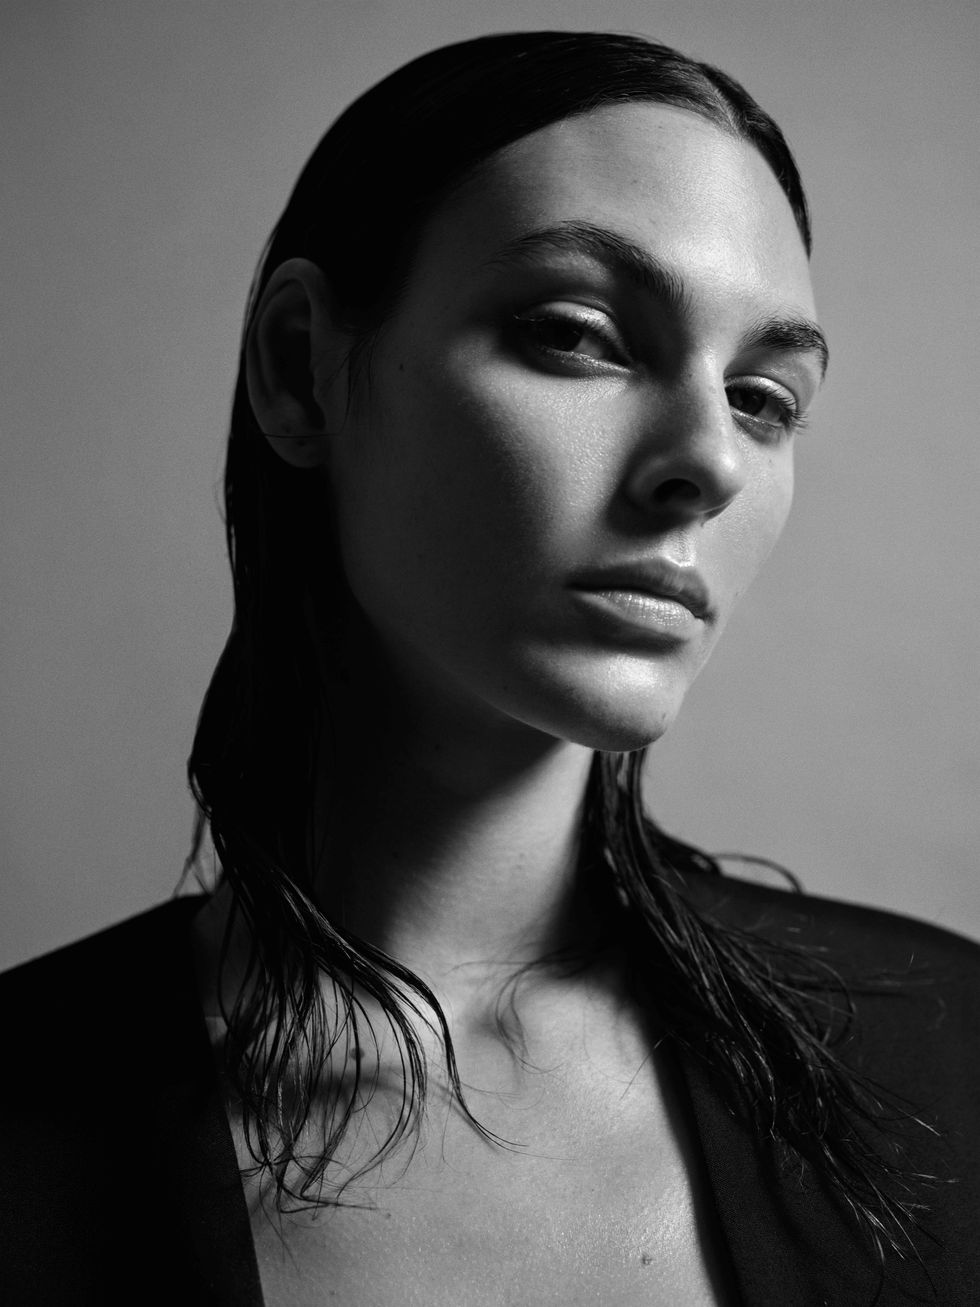 Vittoria Ceretti on Modeling, Spring Fashion, and What’s Next